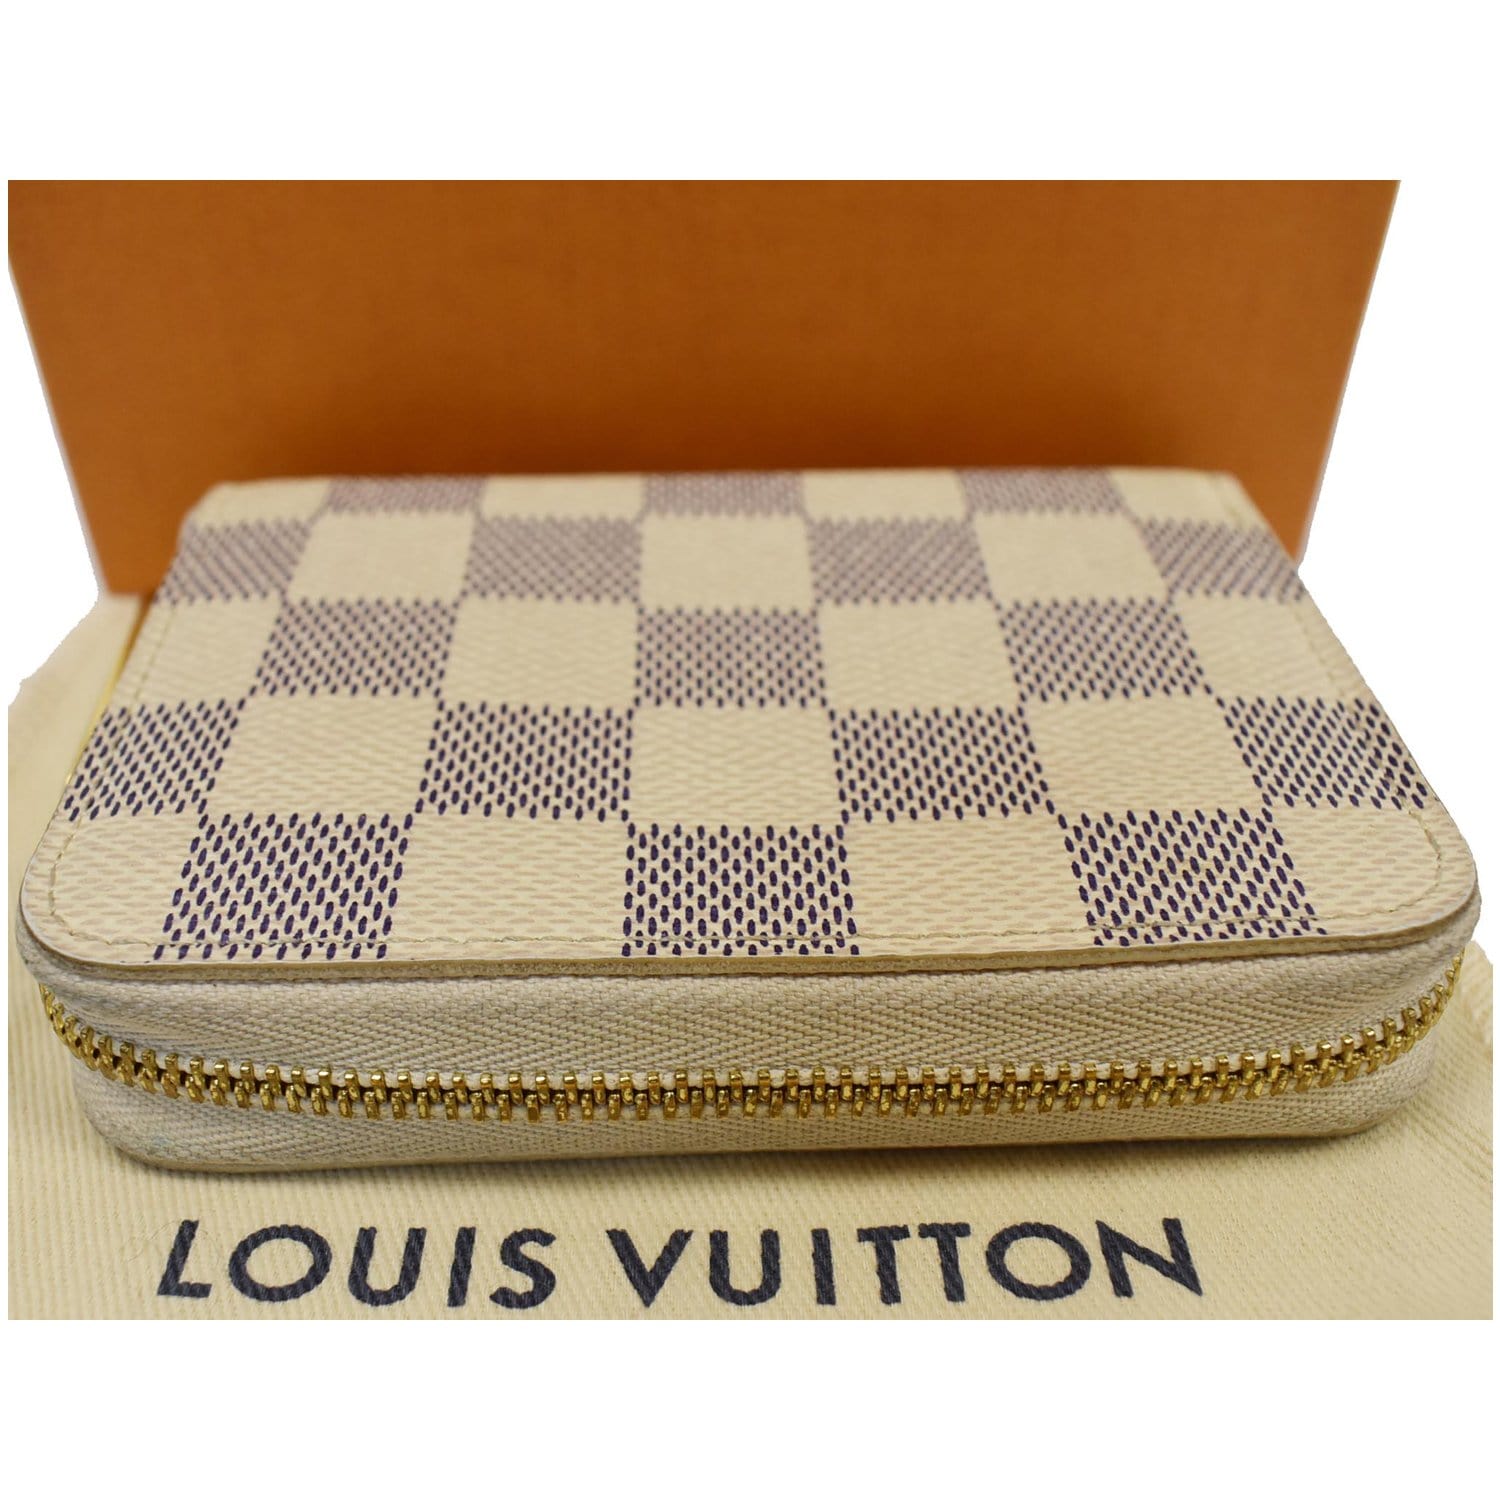 Buy Louis Vuitton Damier Azur LOUIS VUITTON Zippy Coin Purse Damier Azur  N60229 Coin Case White / 083565 [Used] from Japan - Buy authentic Plus  exclusive items from Japan